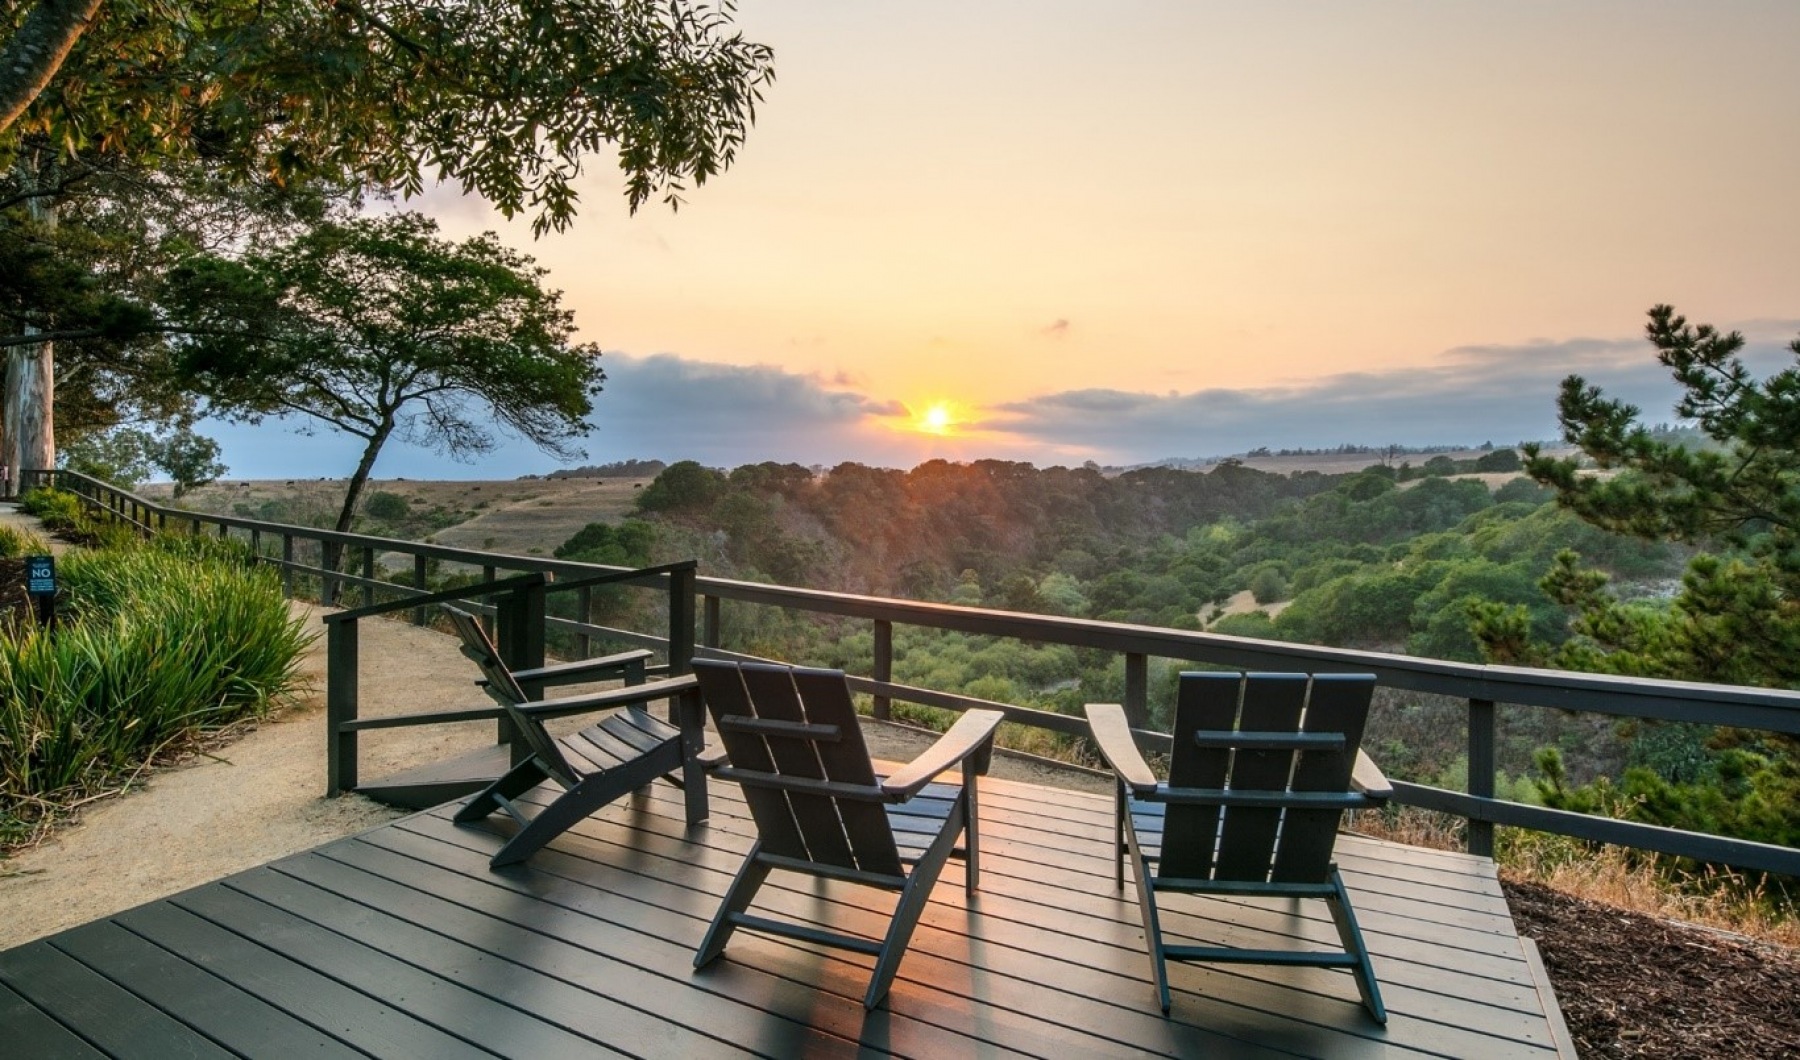 lifestyle image of chairs on a wooden patio overlooking a view